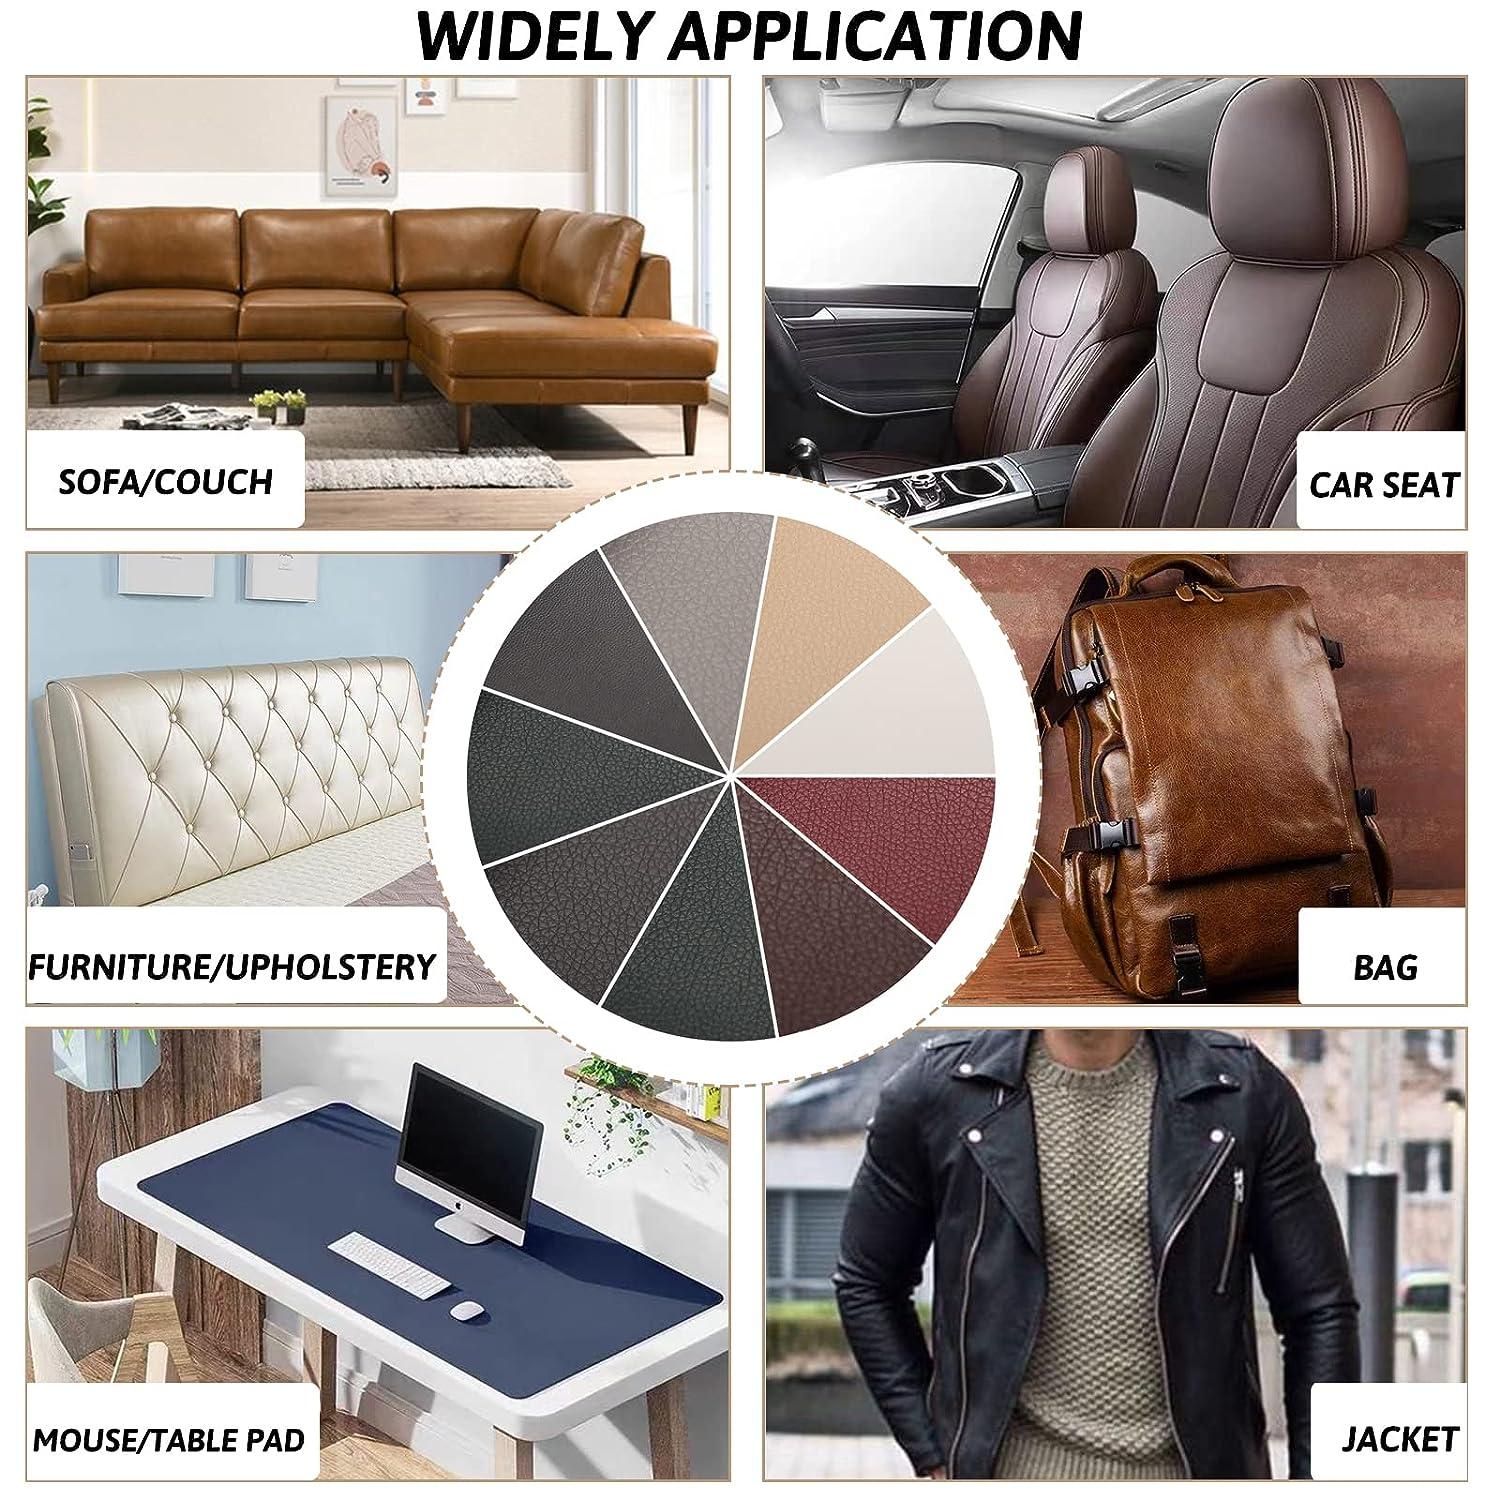 Self-adhesive Faux Leather Repair Kit Tape Jacket Sofa Couch Car